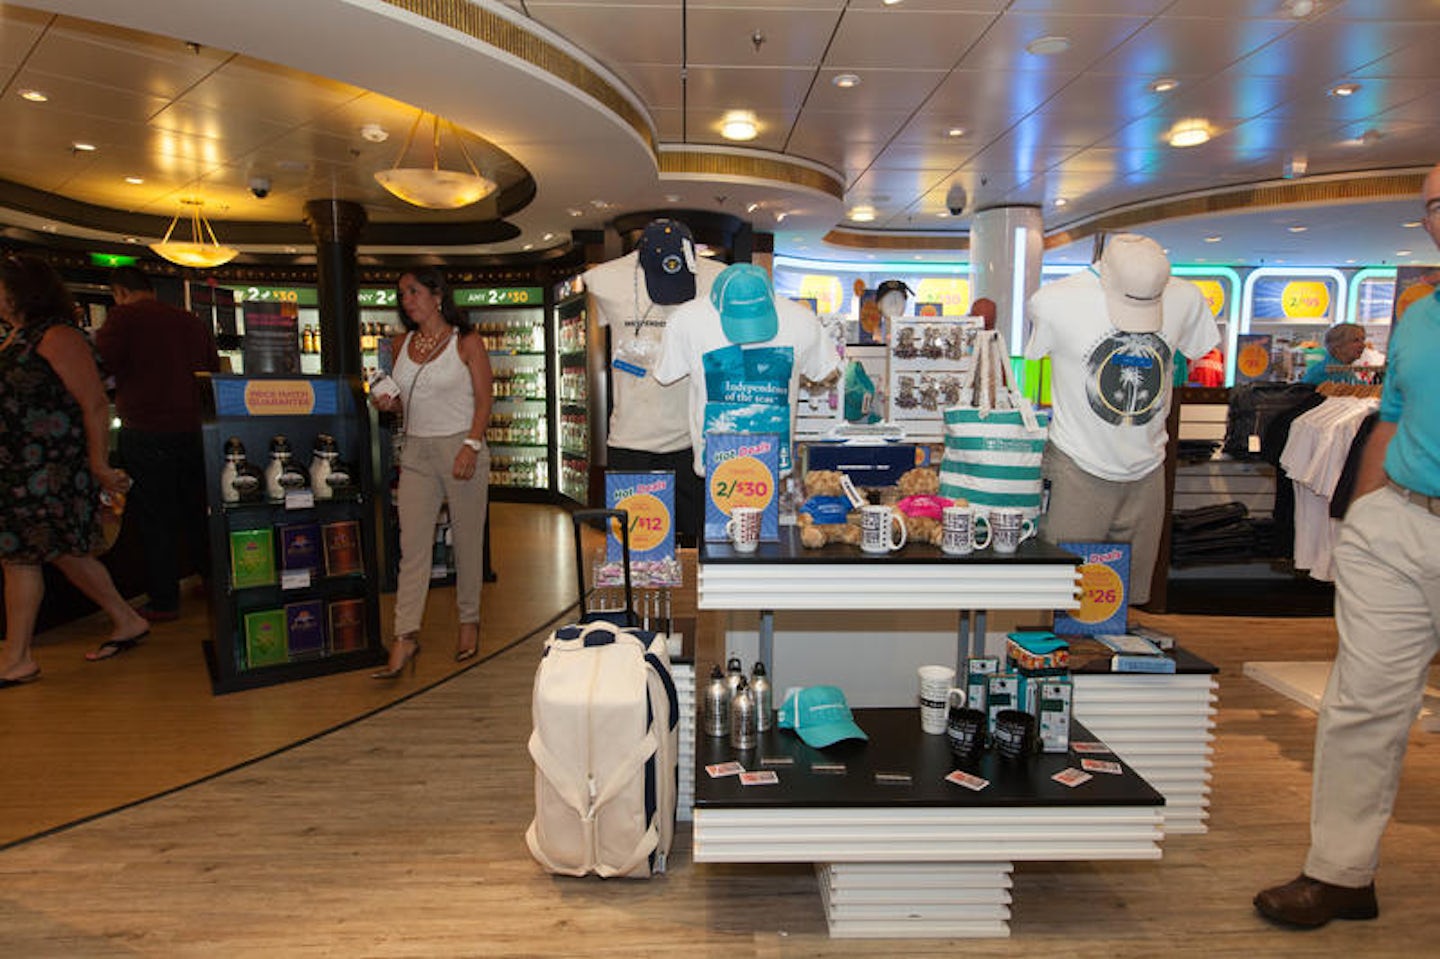 Tax & Duty Free Emporium on Independence of the Seas